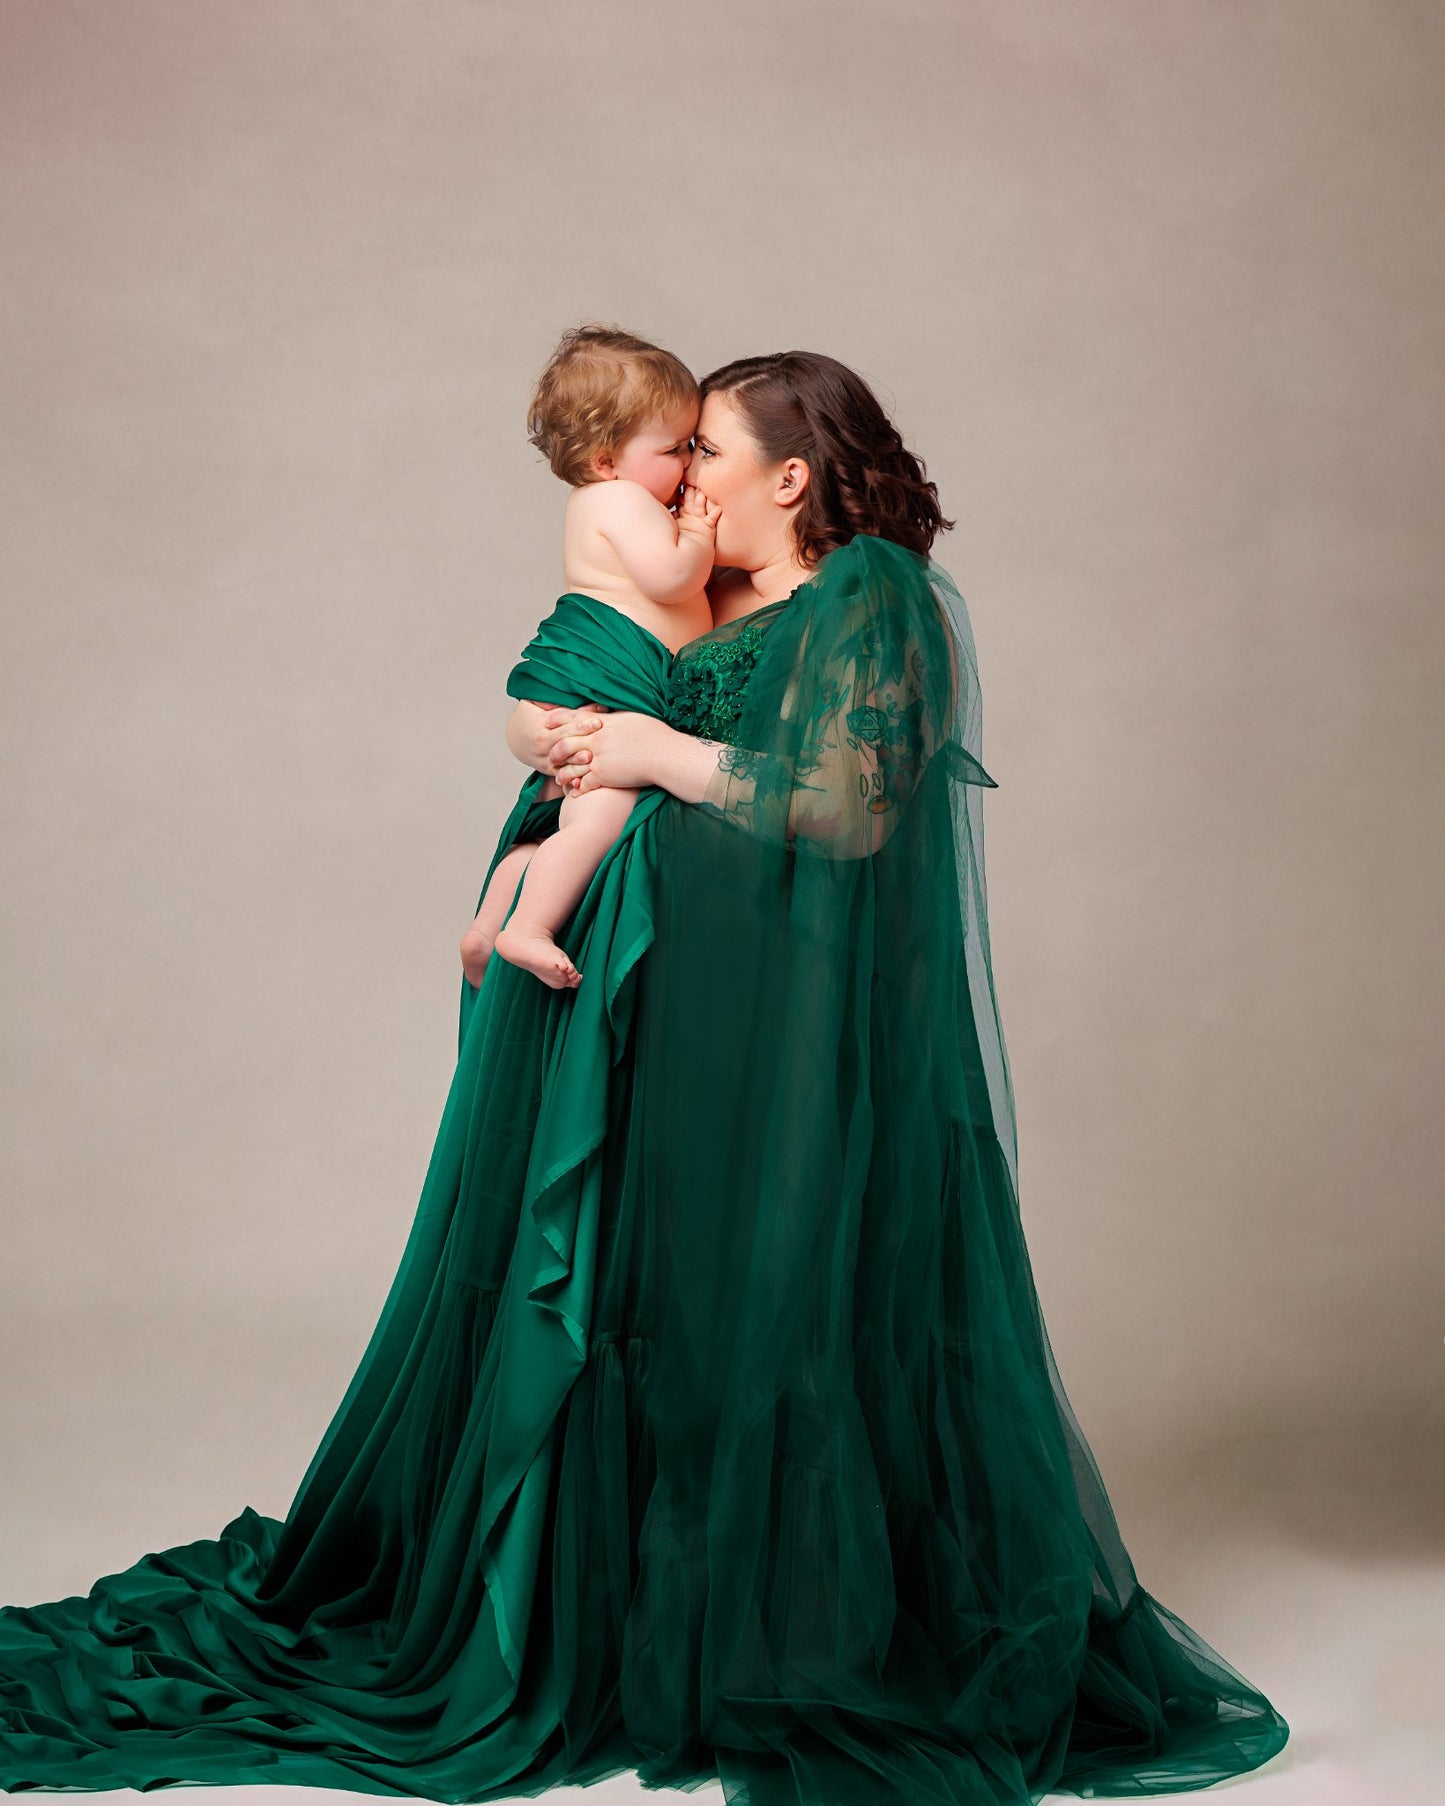 Emerald Wisteria Gown - maternity photoshoot dress